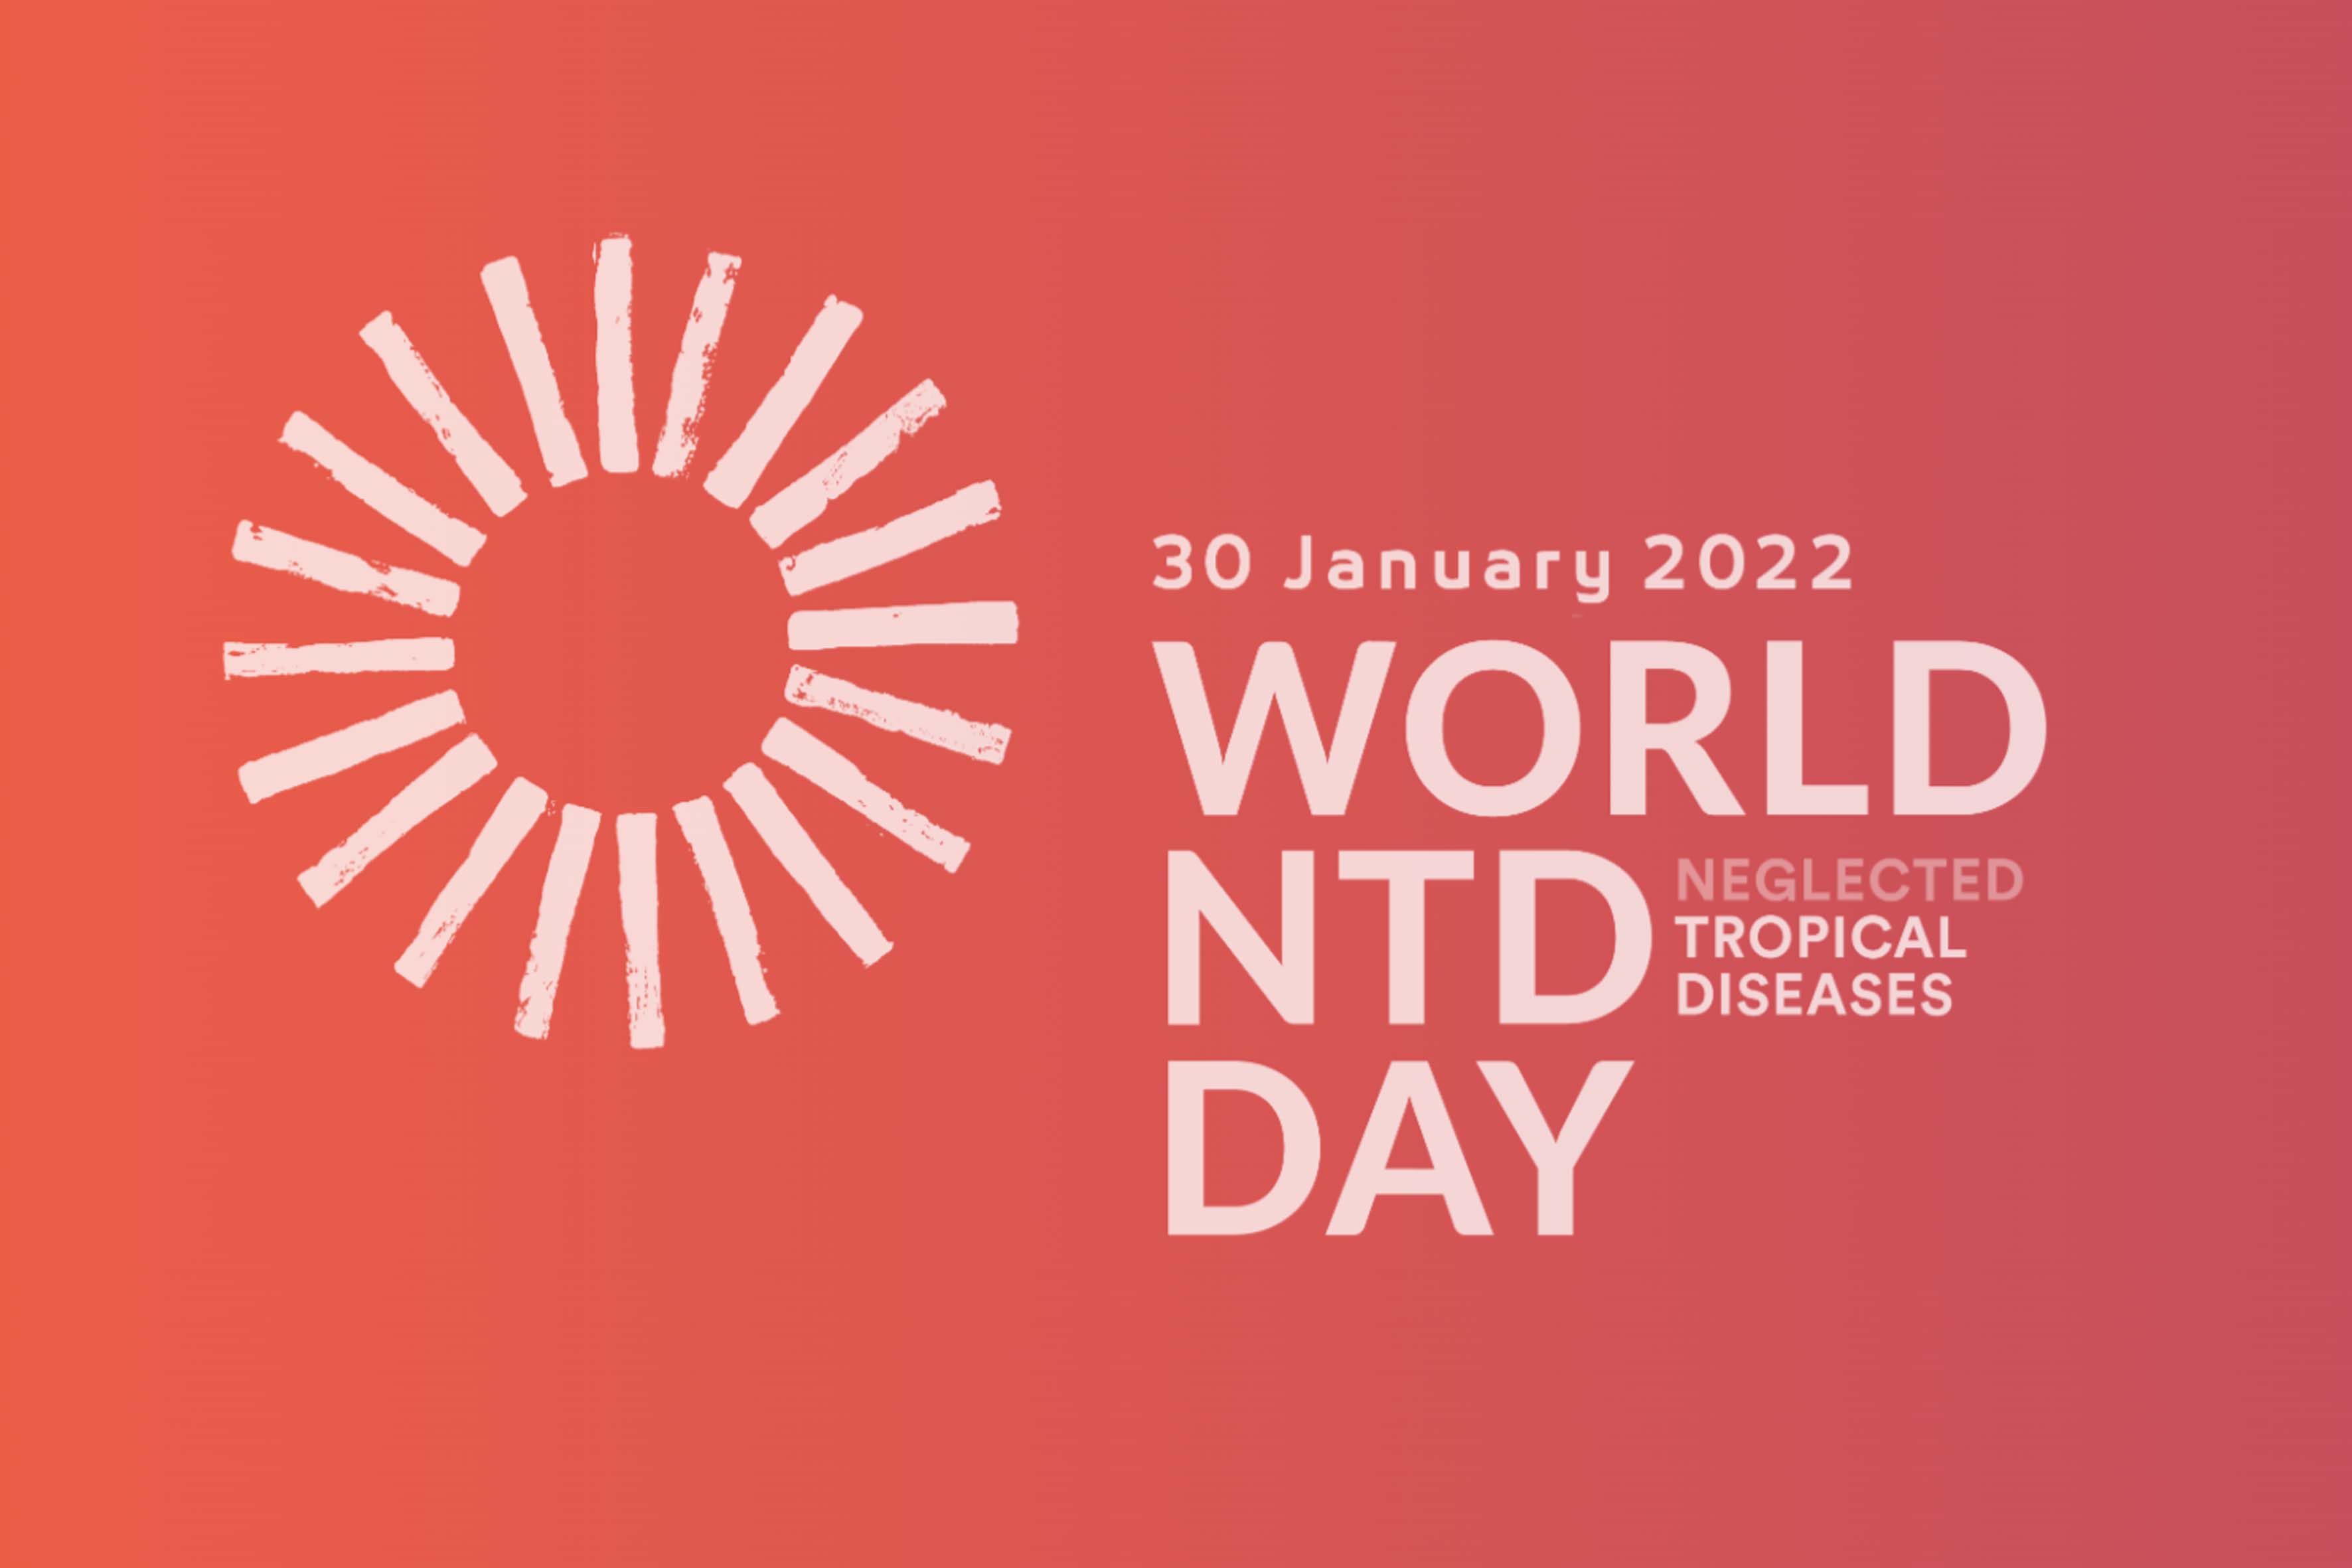 World Neglected Tropical Diseases Day: WHO calls for equitable health services for all